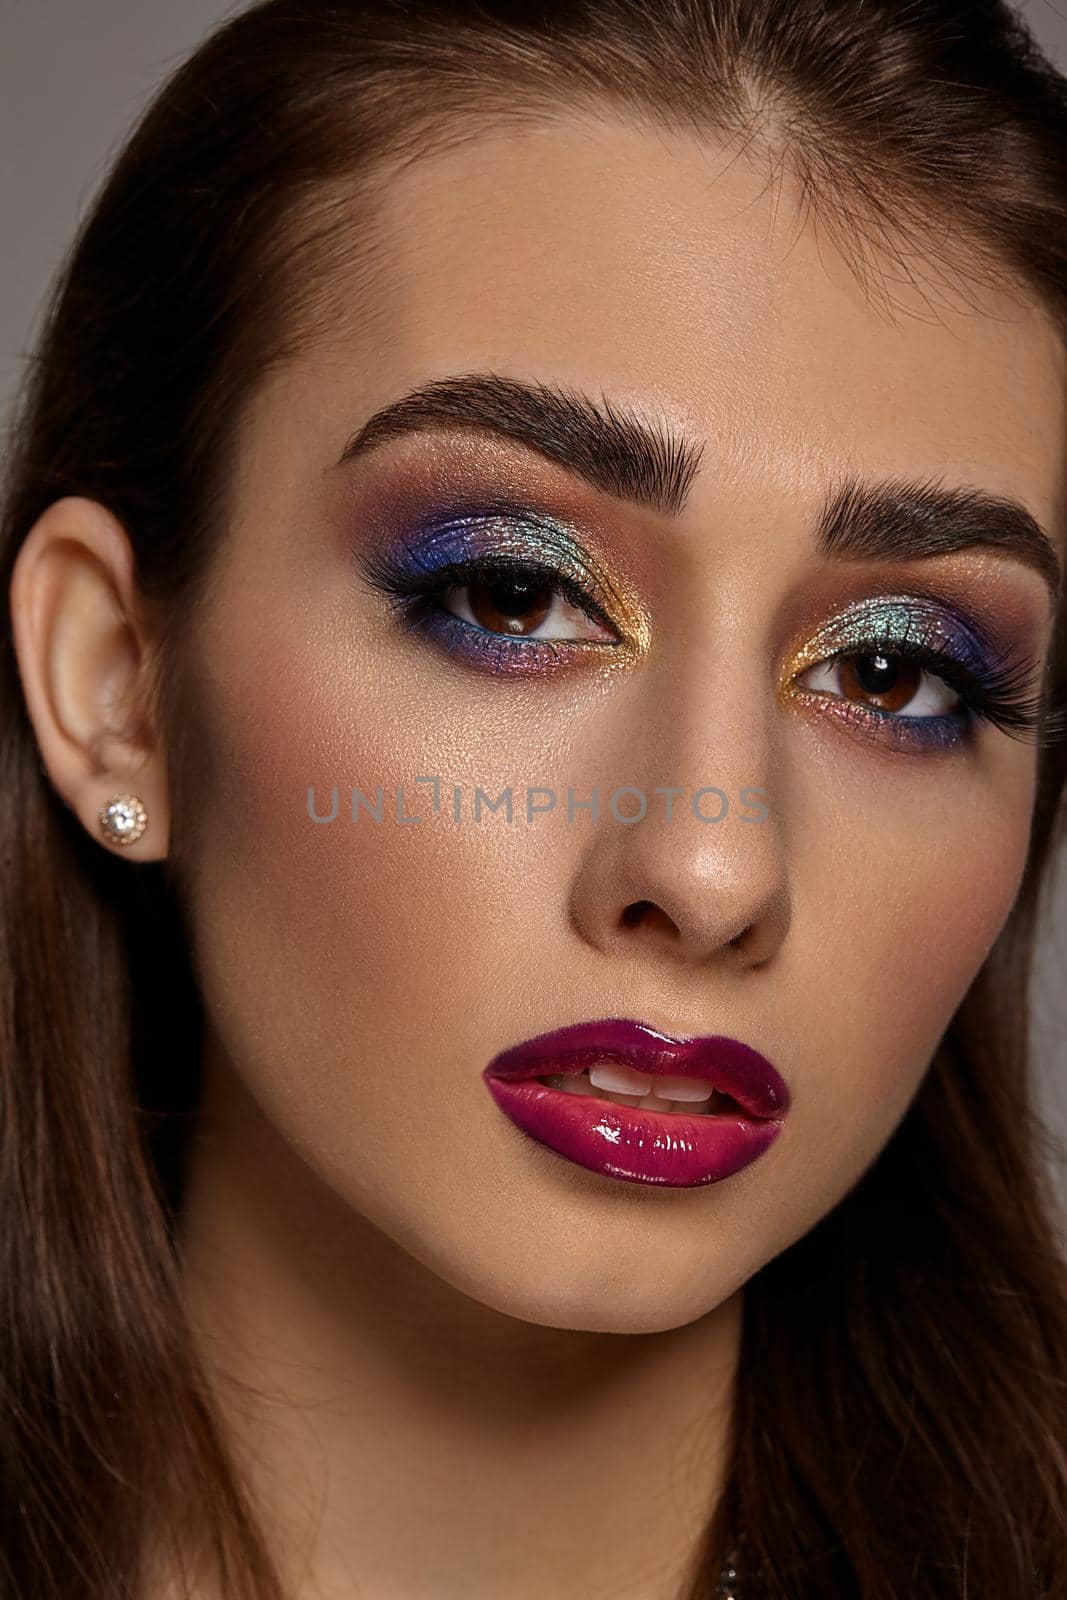 Brunette girl in earrings looking at you while posing on gray background. Luxury makeup, perfect skin. Multi-colored eyeshadow, false eyelashes, glossy purple lips. Professional maquillage. Close up